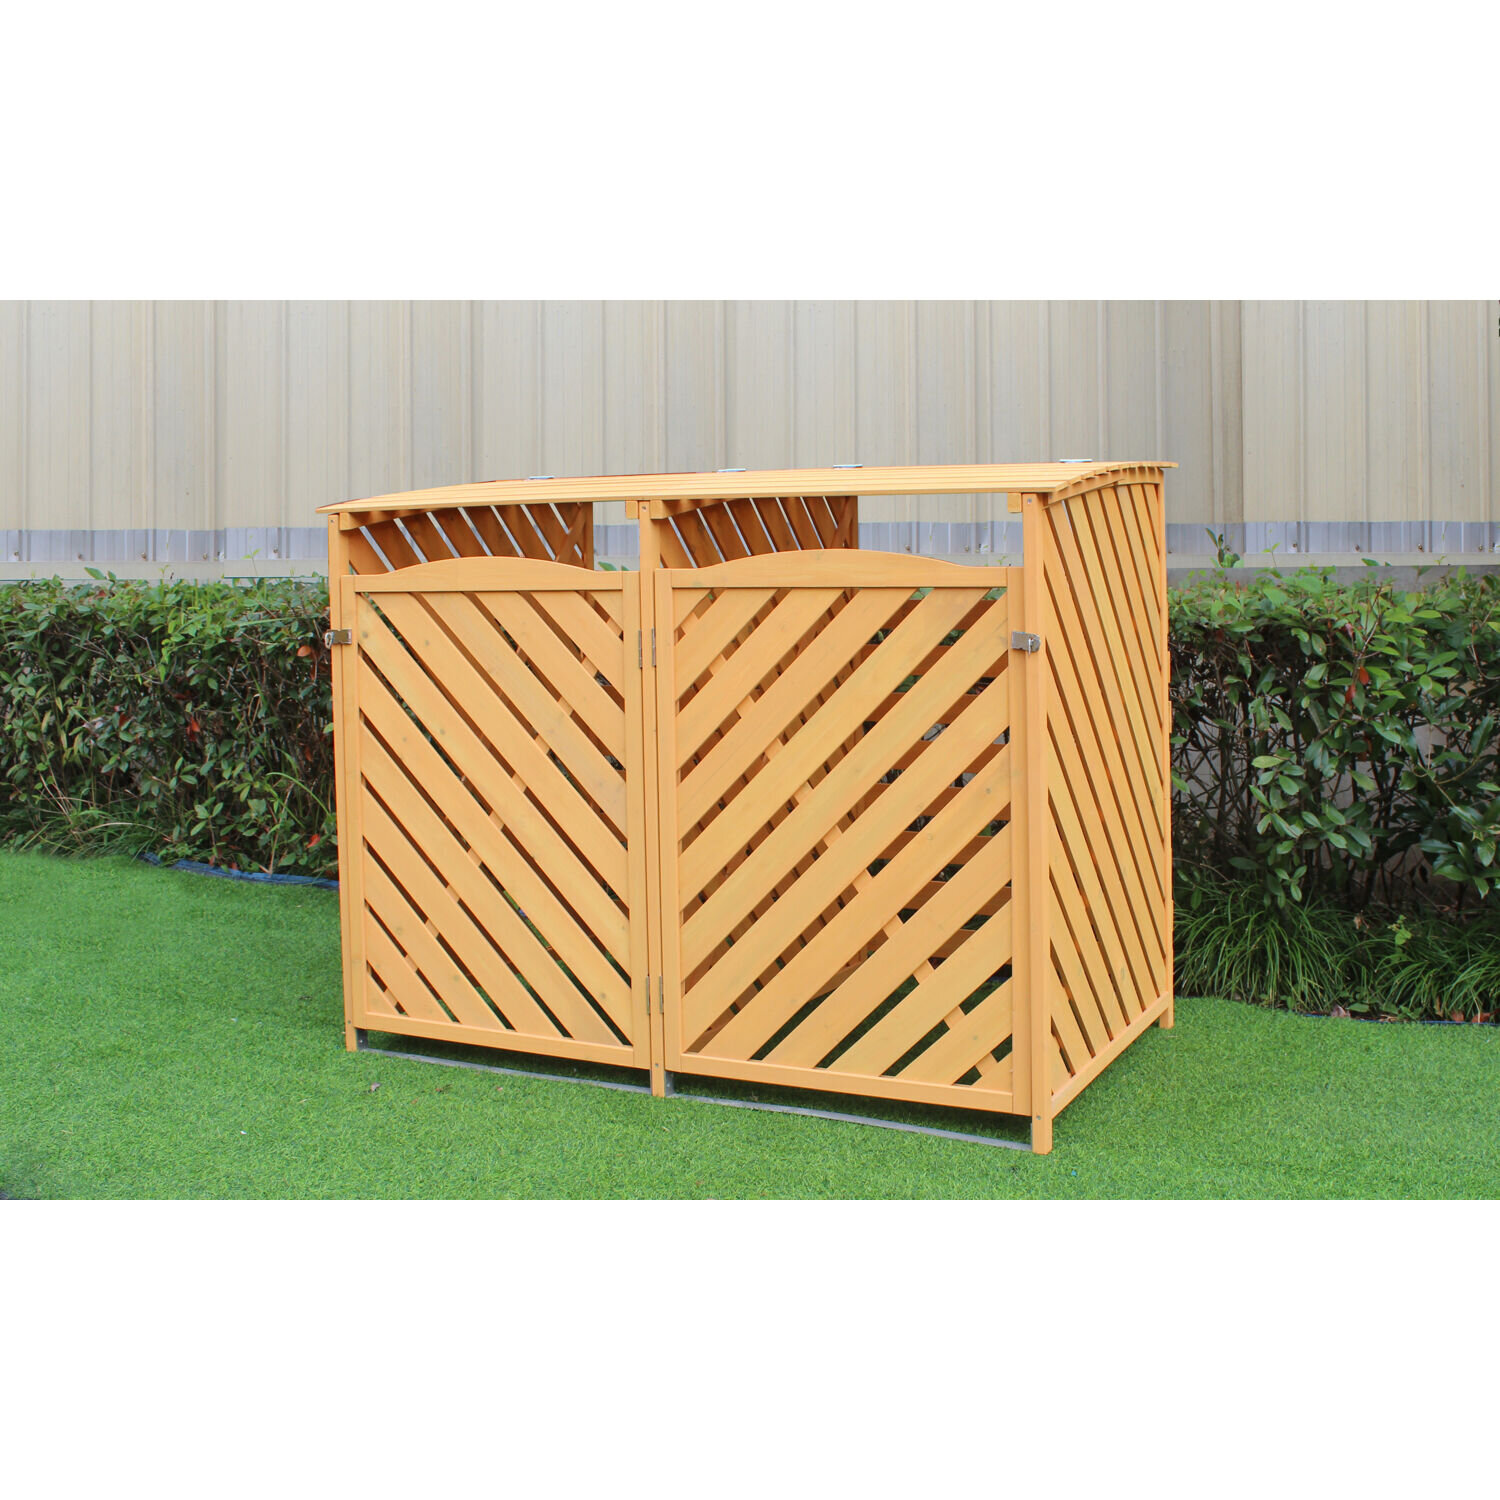 Hanover Outdoor 488 Ft X 301 Ft Wooden Trash Bin And Recyclables Storage Shed 